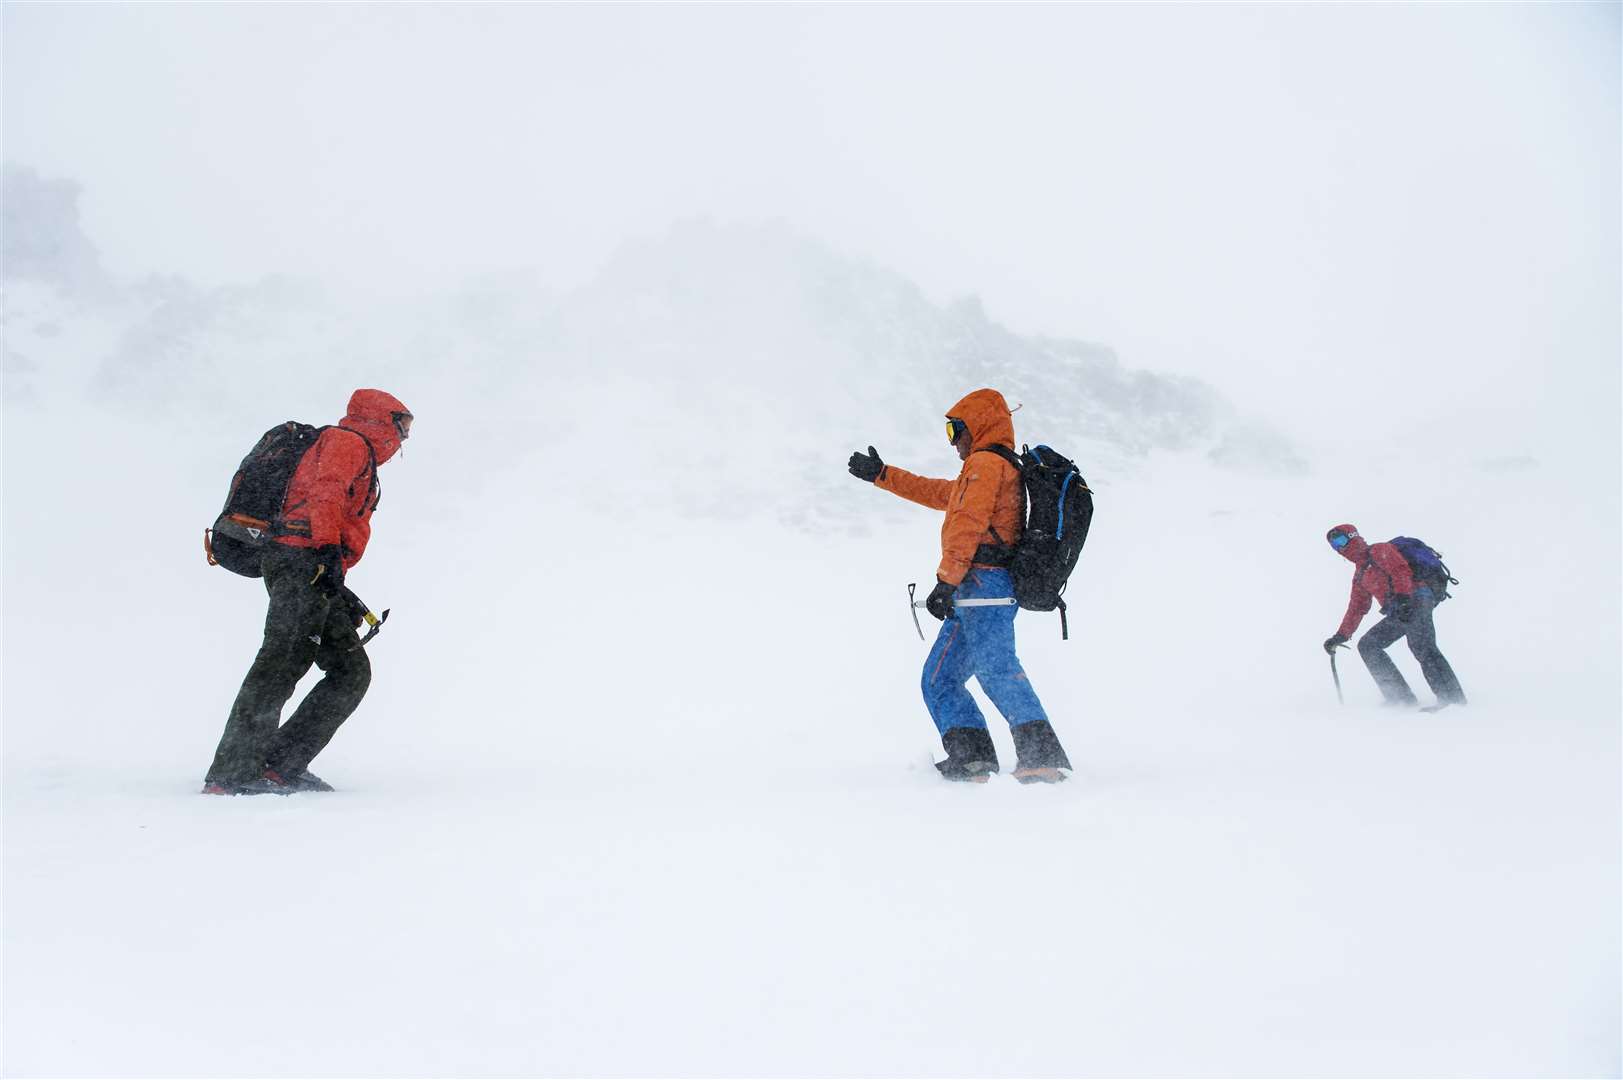 Decision making is vital in winter conditions in the mountains.